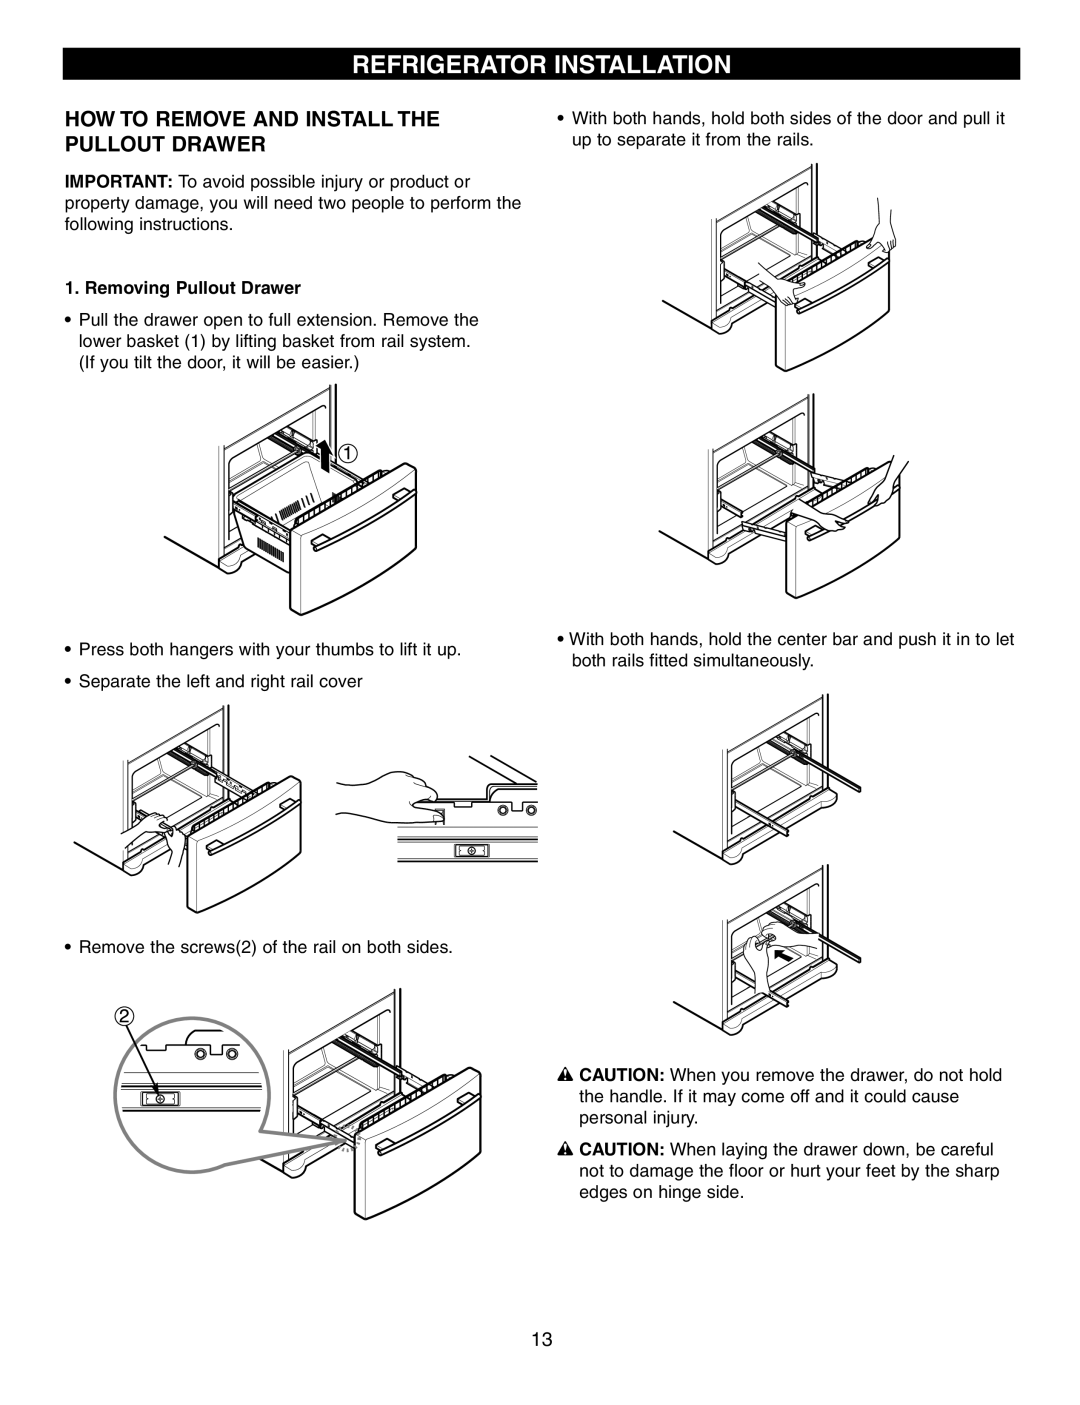 LG Electronics LFC25760 Refrigerator Installation, How To Remove And Install The Pullout Drawer, Removing Pullout Drawer 